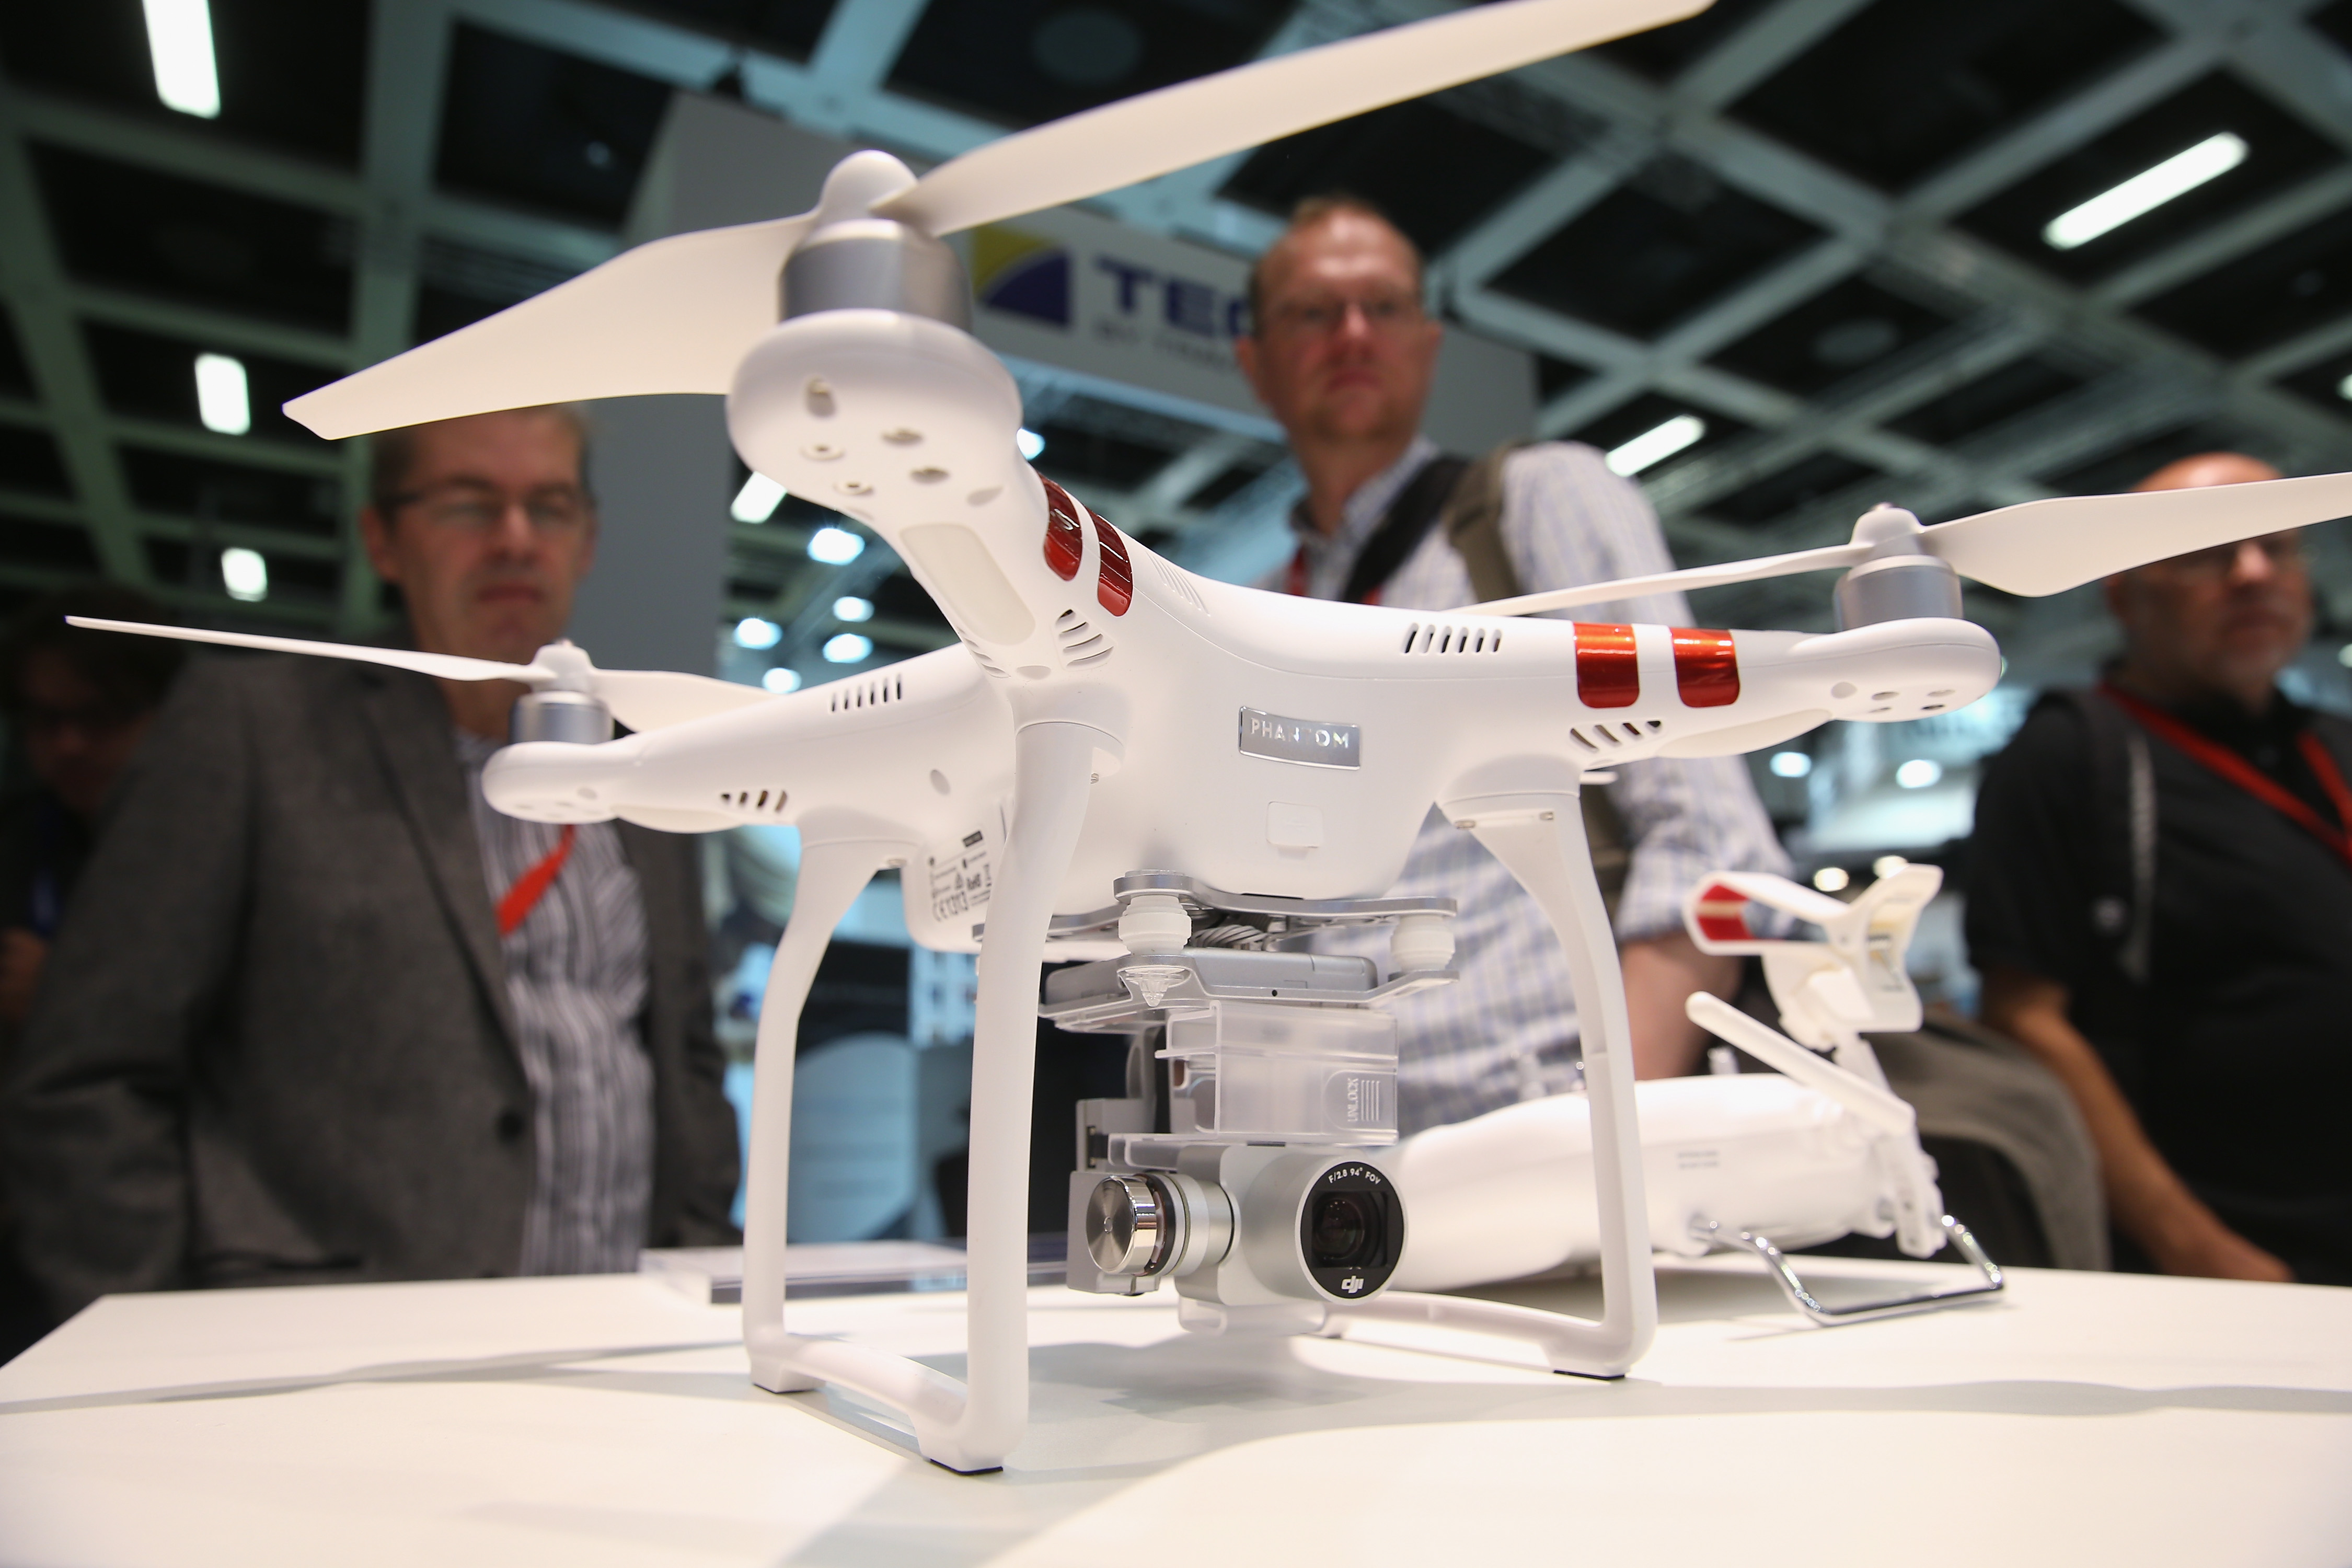 Visitors look at a Phantom 3 Standard quadcopter drone at the DJI stand during a press day at the 2015 IFA consumer electronics and appliances trade fair on September 3, 2015 in Berlin, Germany. (Sean Gallup&mdash;Getty Images)